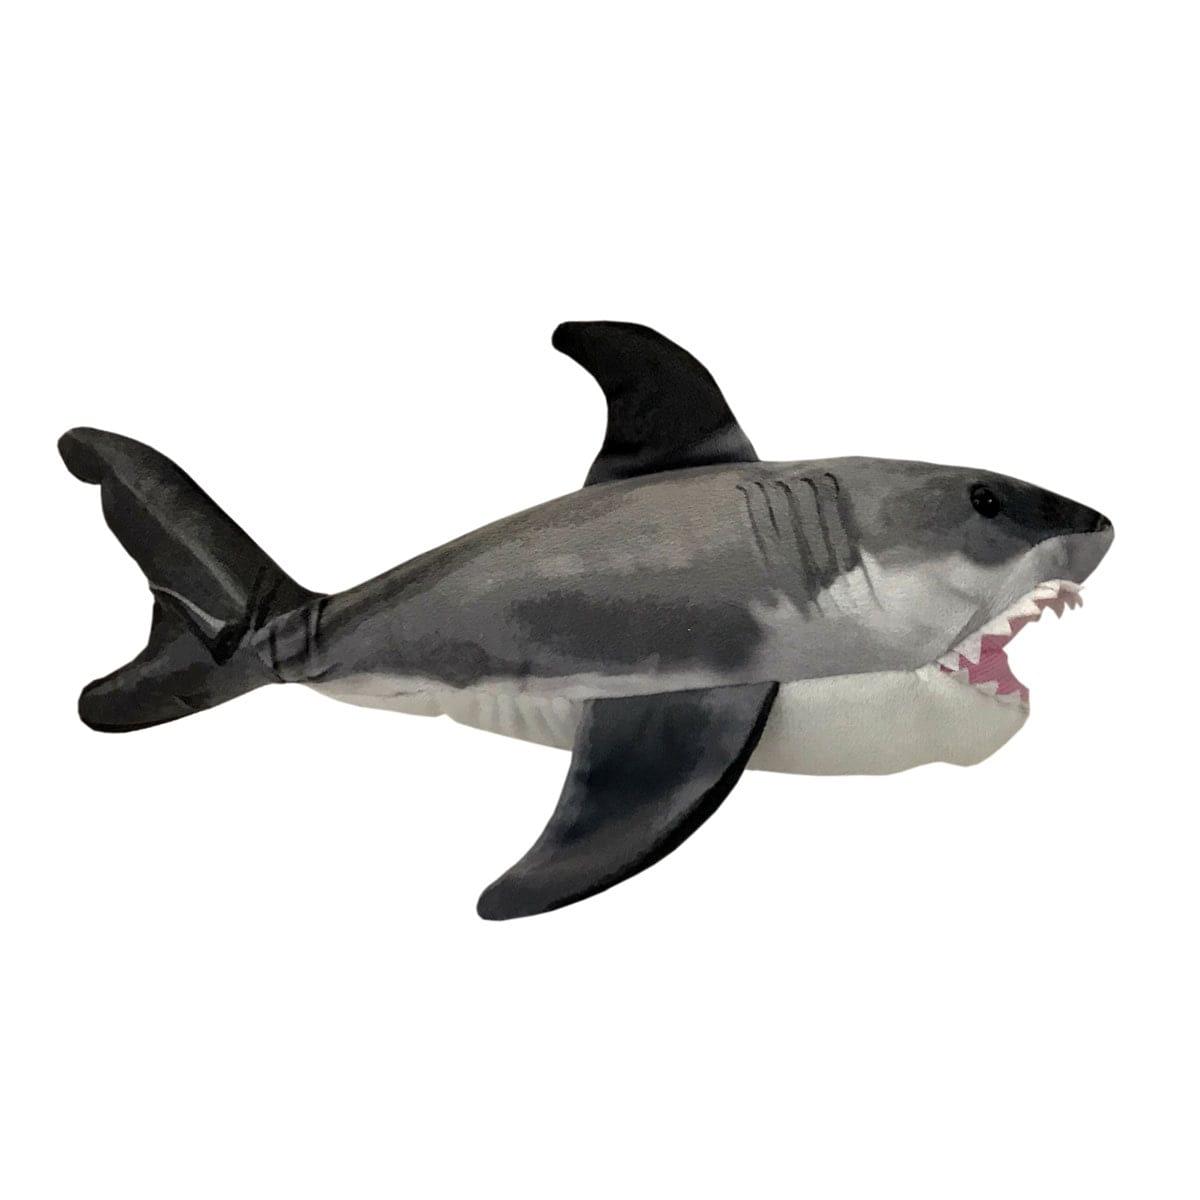 JAWS Bruce the Shark 12 Inch Collectible Plush